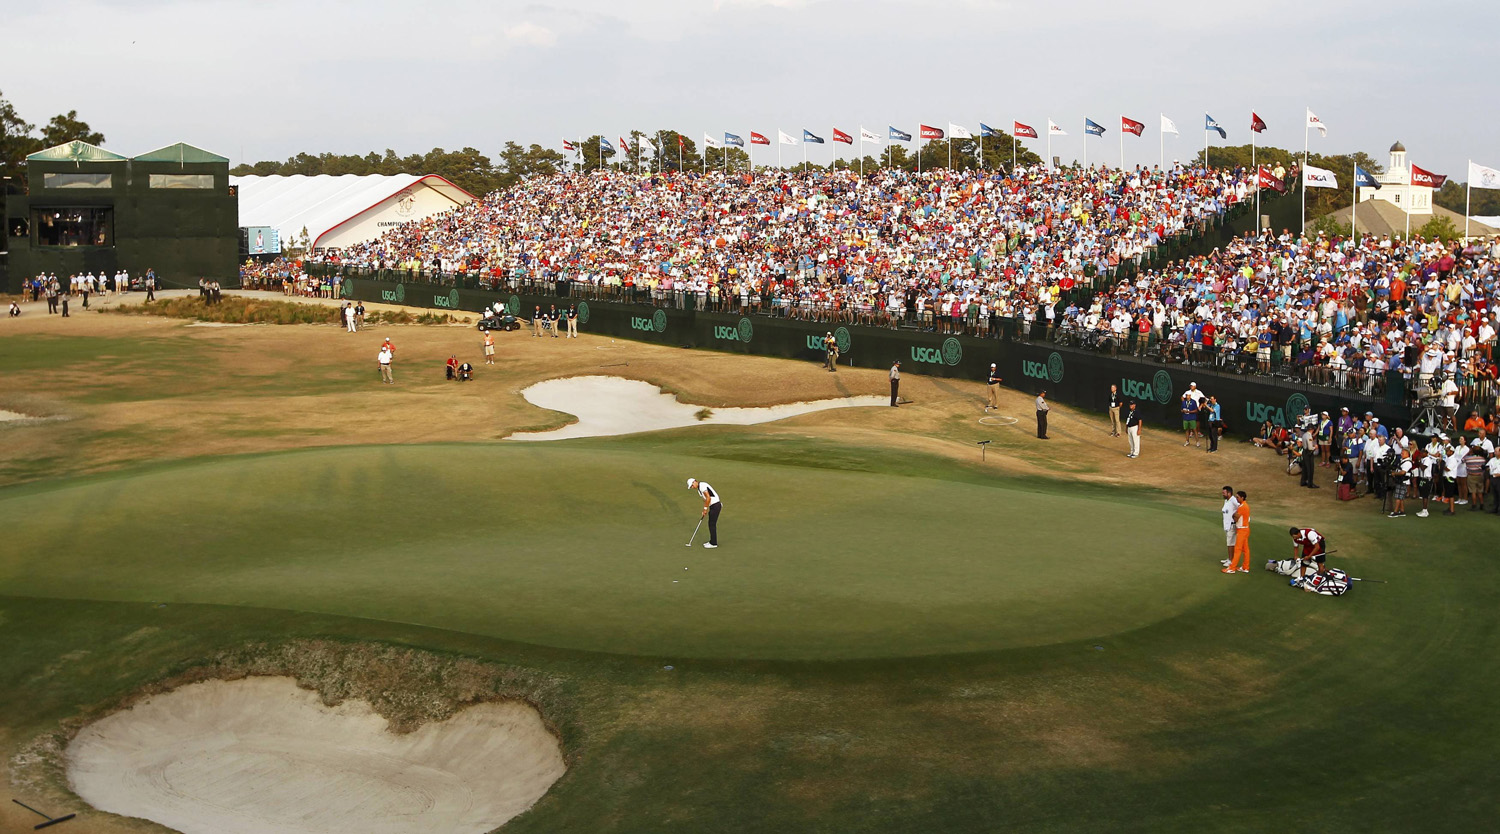 Martin Kaymer of Germany sinks his putt on the 18th green to win the U.S. Open Championship golf tournament in Pinehurst